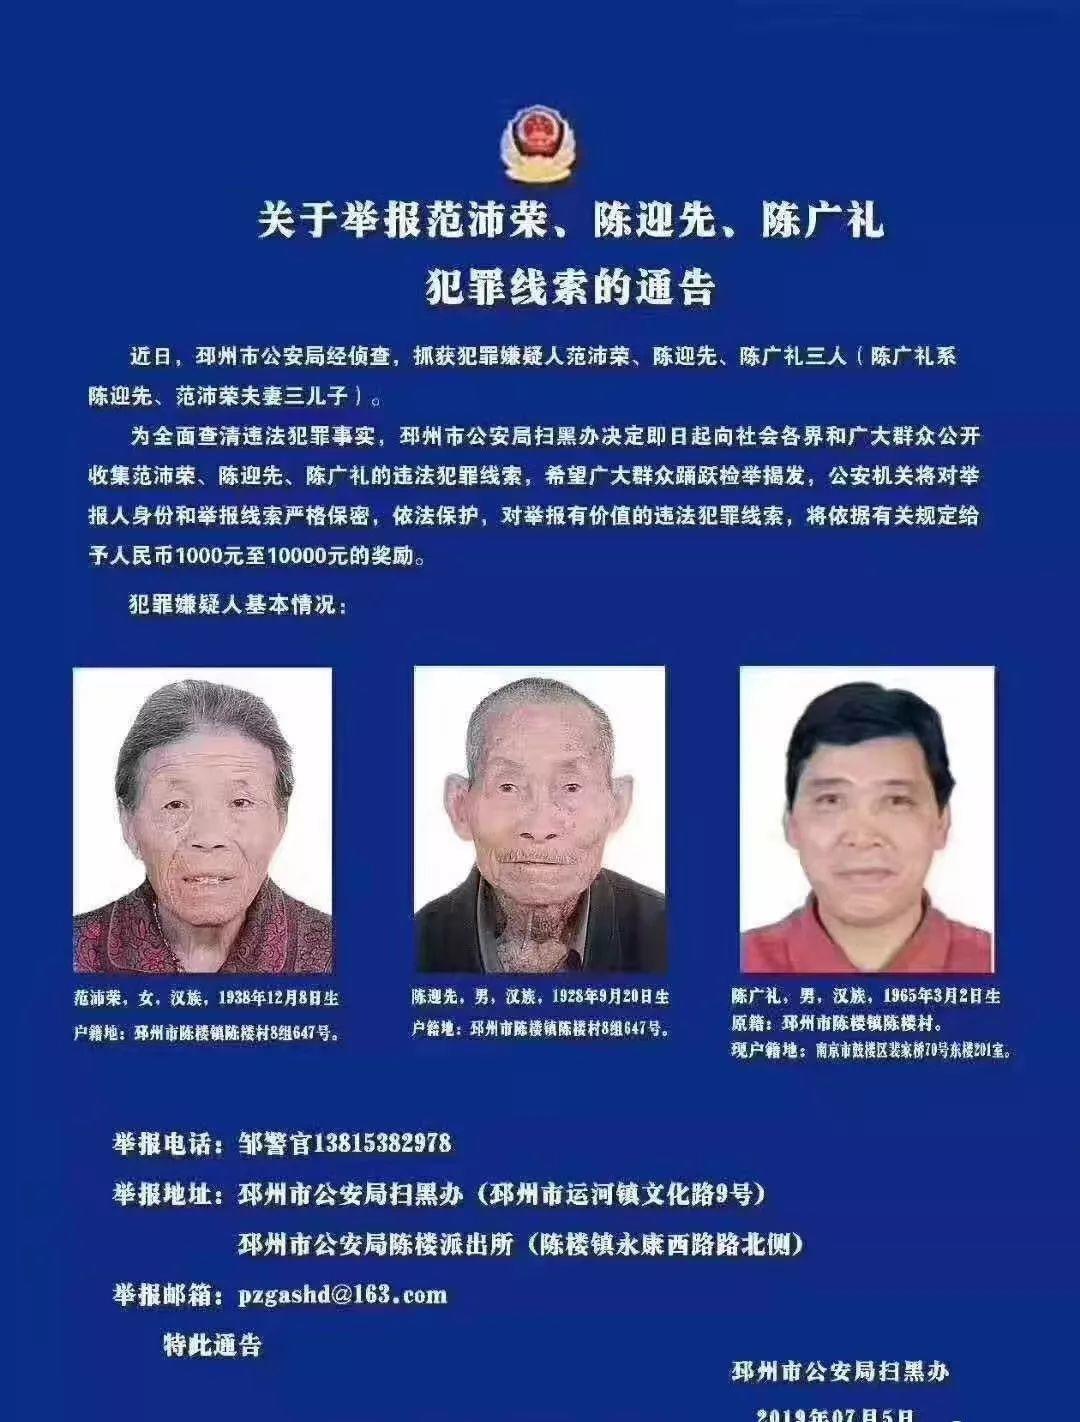 chinese couple, 91 & 81, detained after...